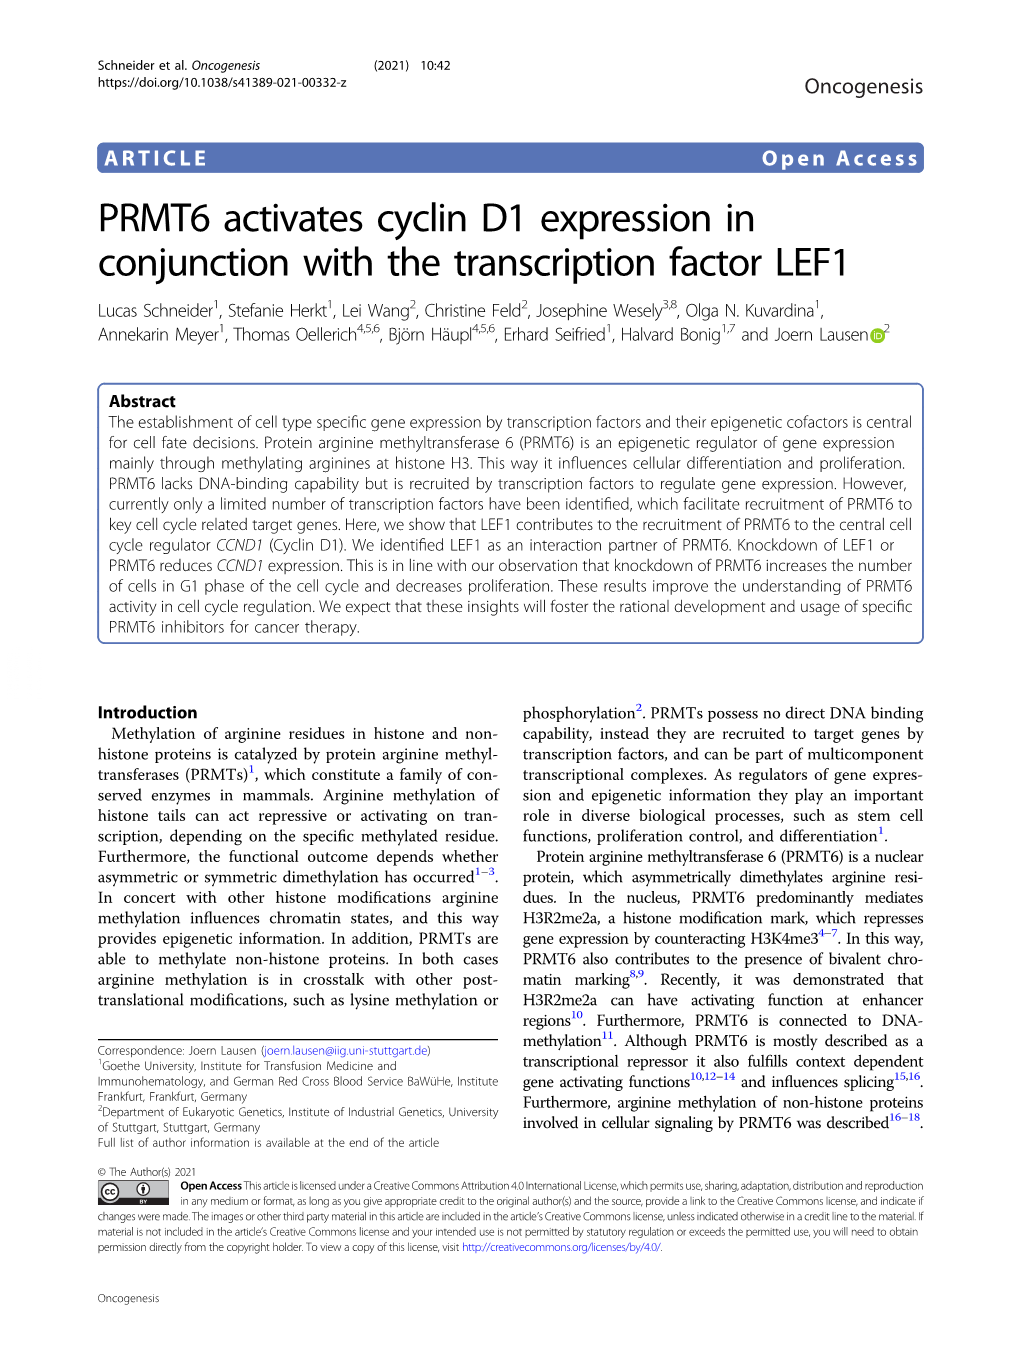 PRMT6 Activates Cyclin D1 Expression in Conjunction with the Transcription Factor LEF1